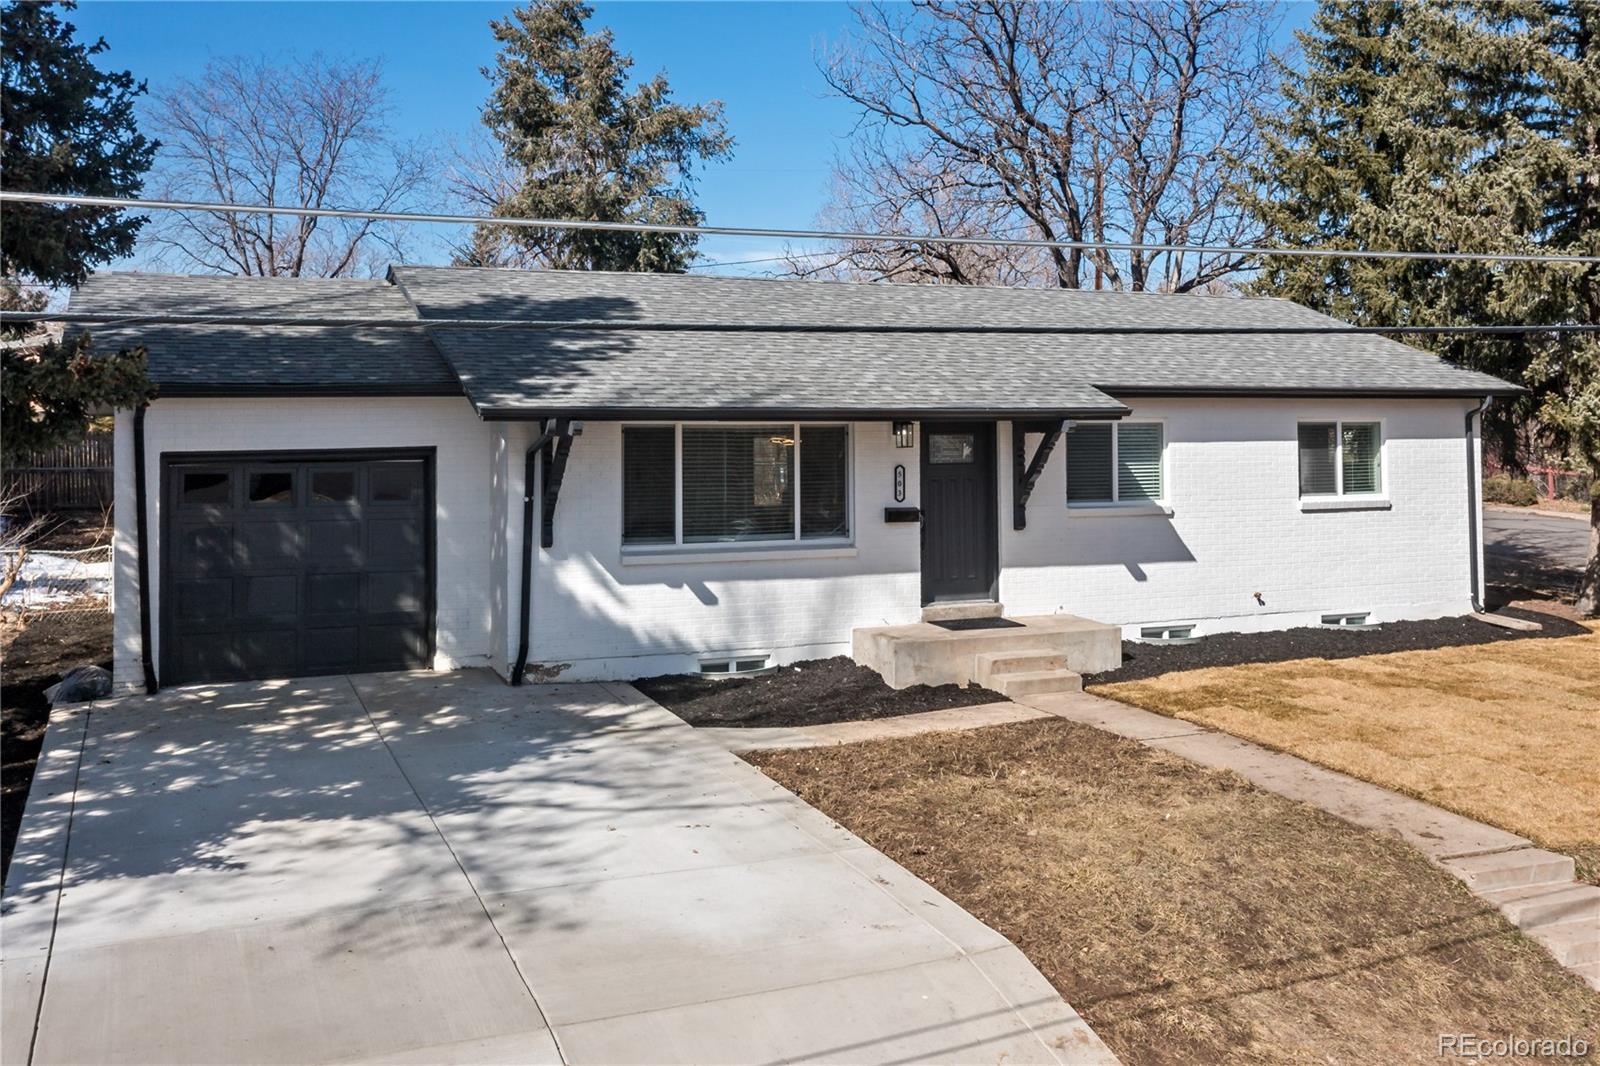 CMA Image for 1771 s youngfield court,Lakewood, Colorado